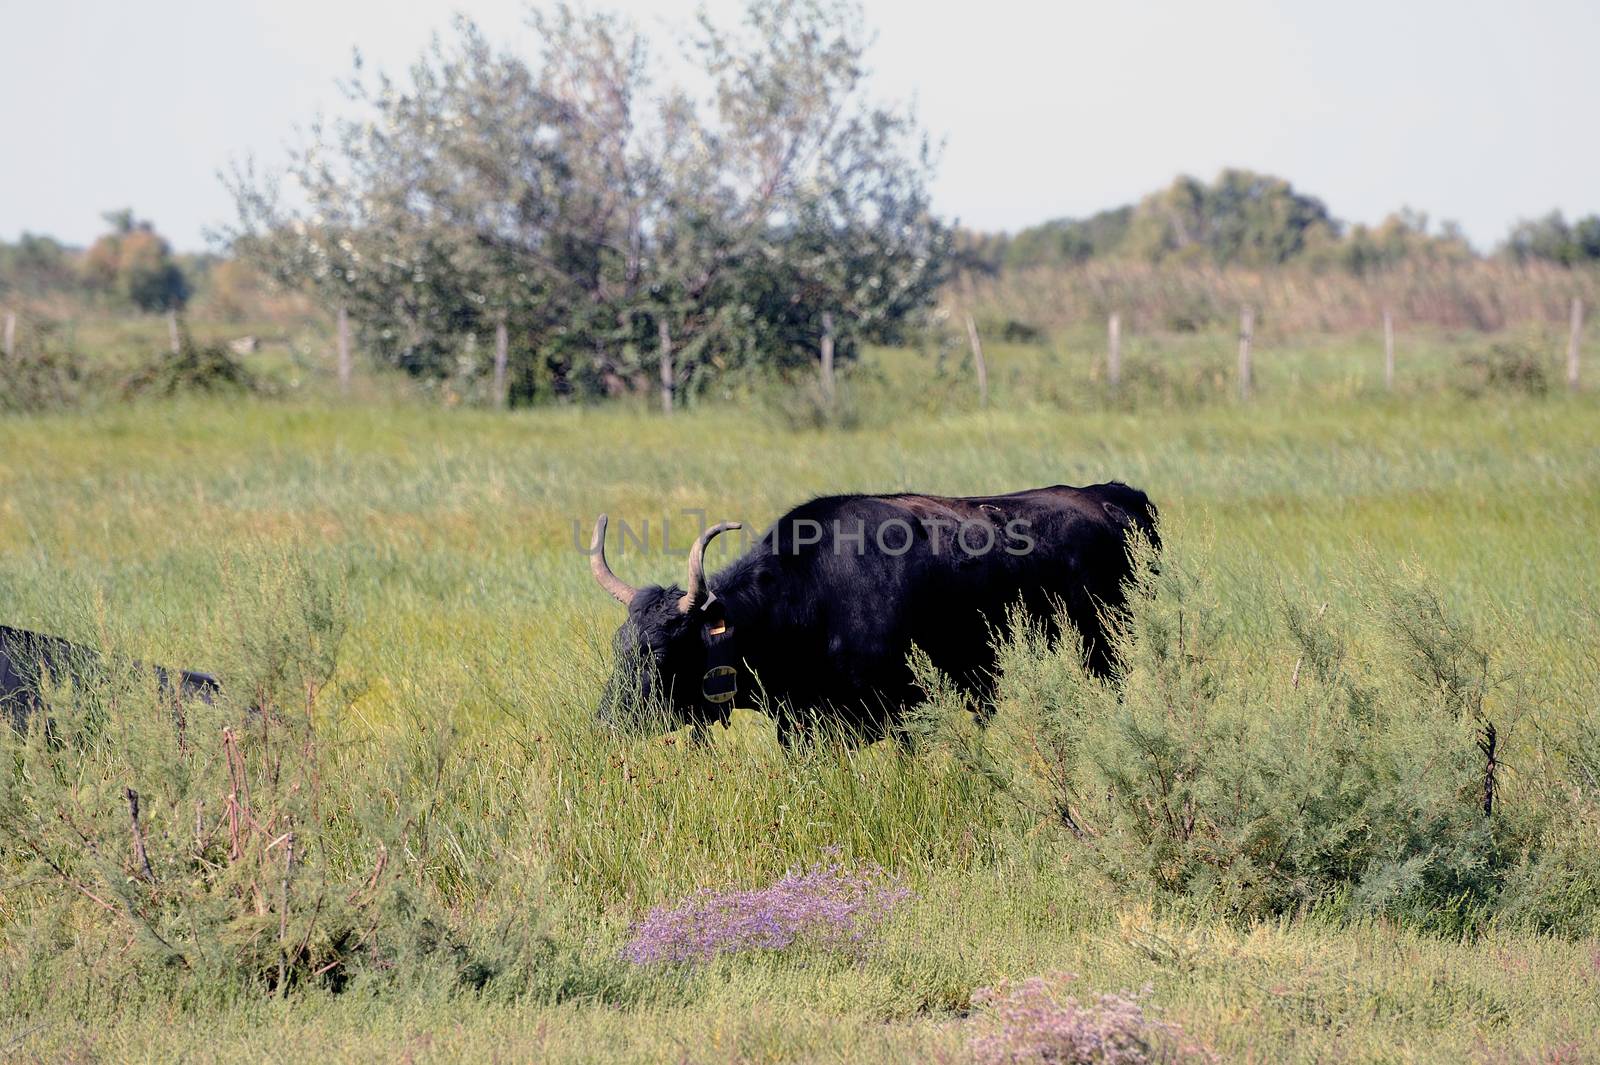 Camargue bulls in their pasture in the tall grass.